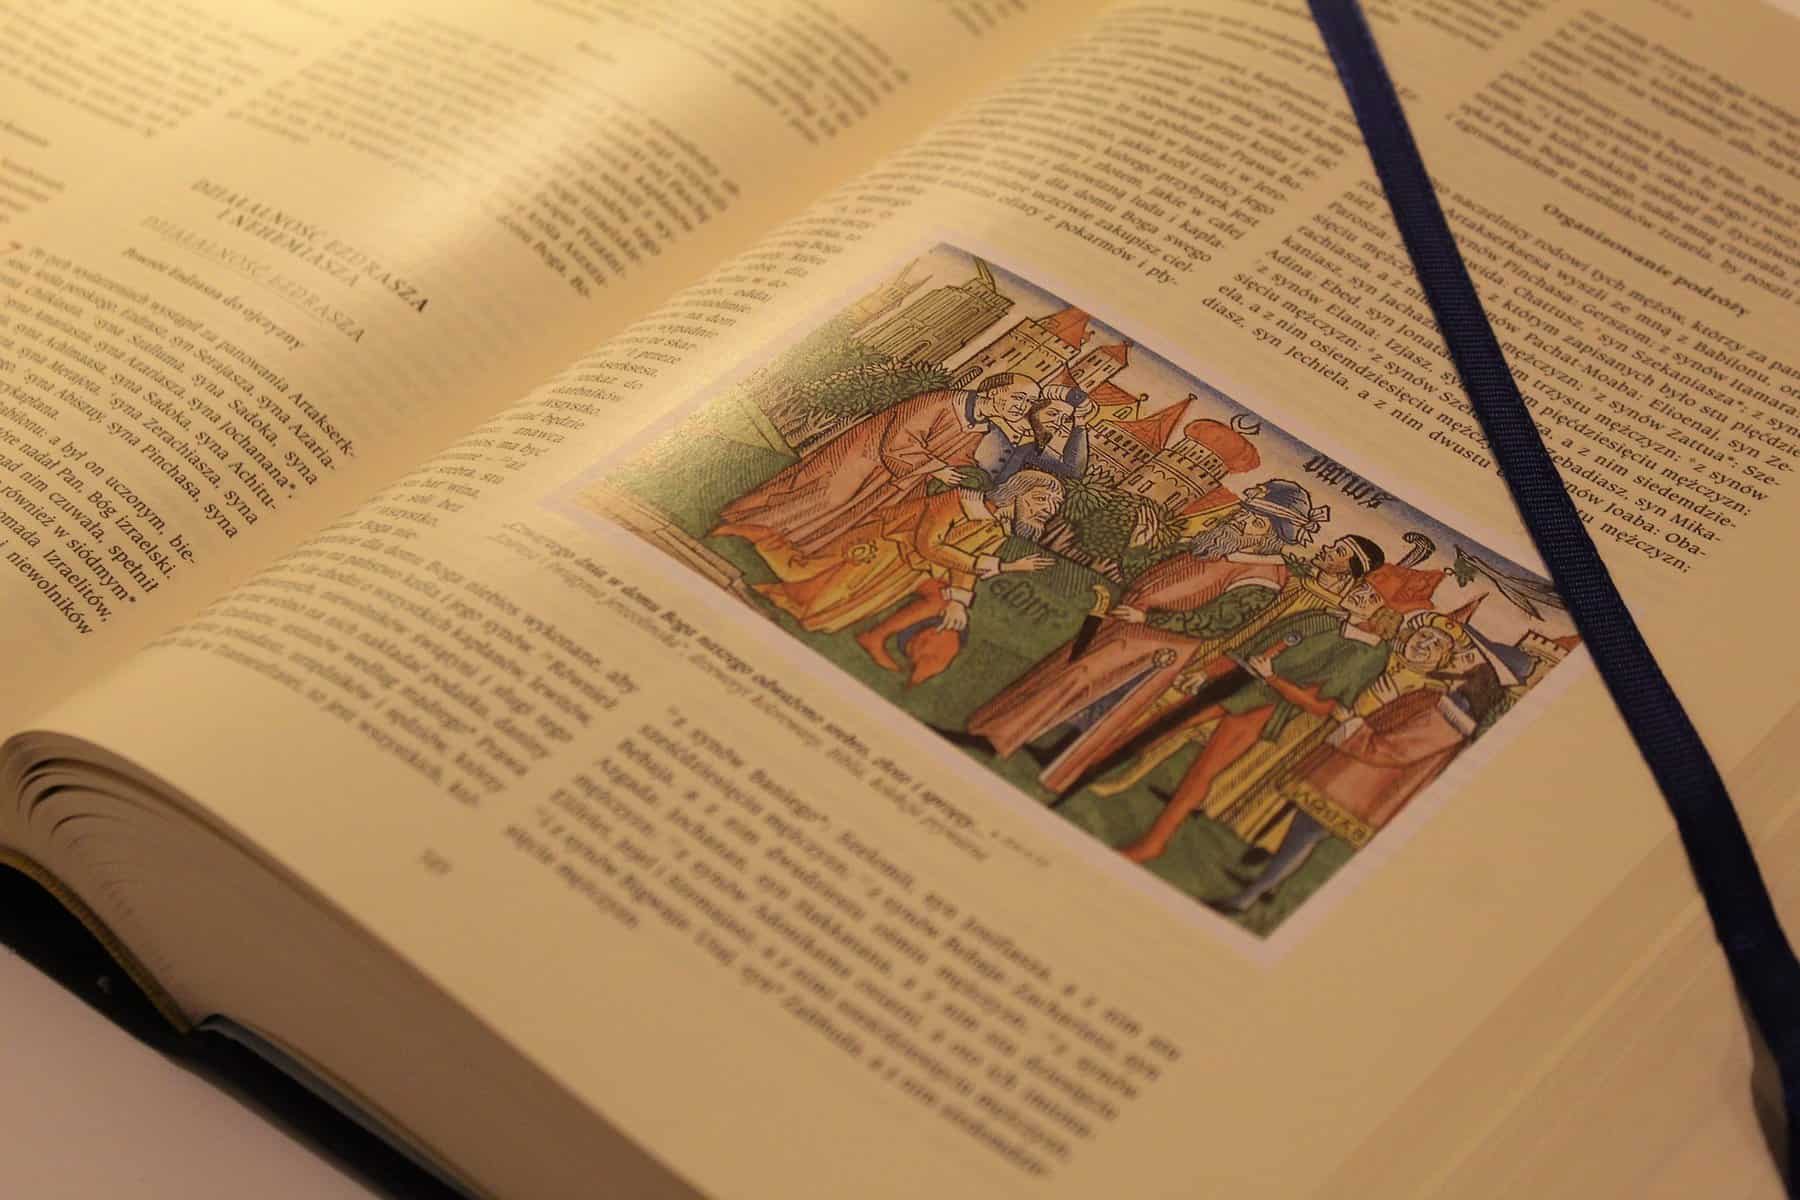 A page of an illustrated Bible in a non-English language is shown.